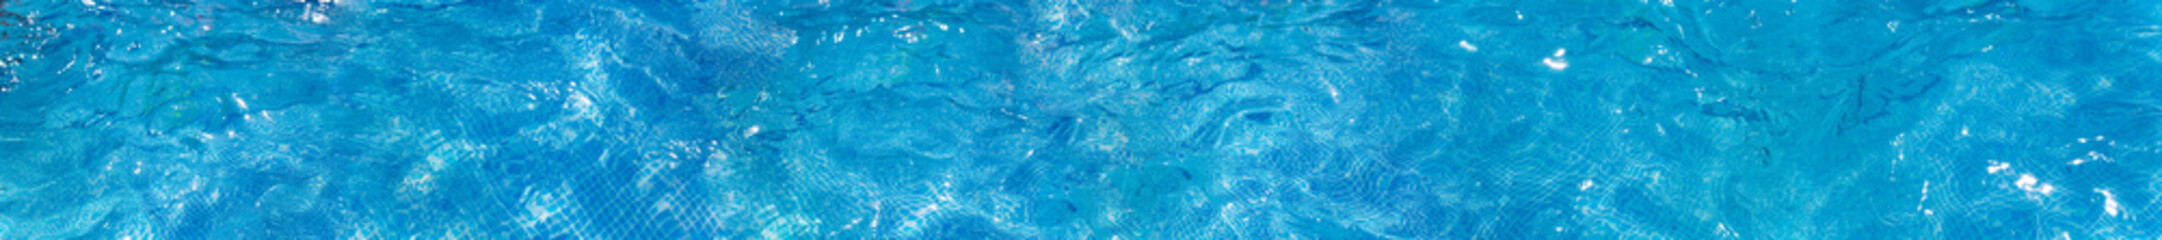 pool water ripples with sunlight glittery reflections, banner